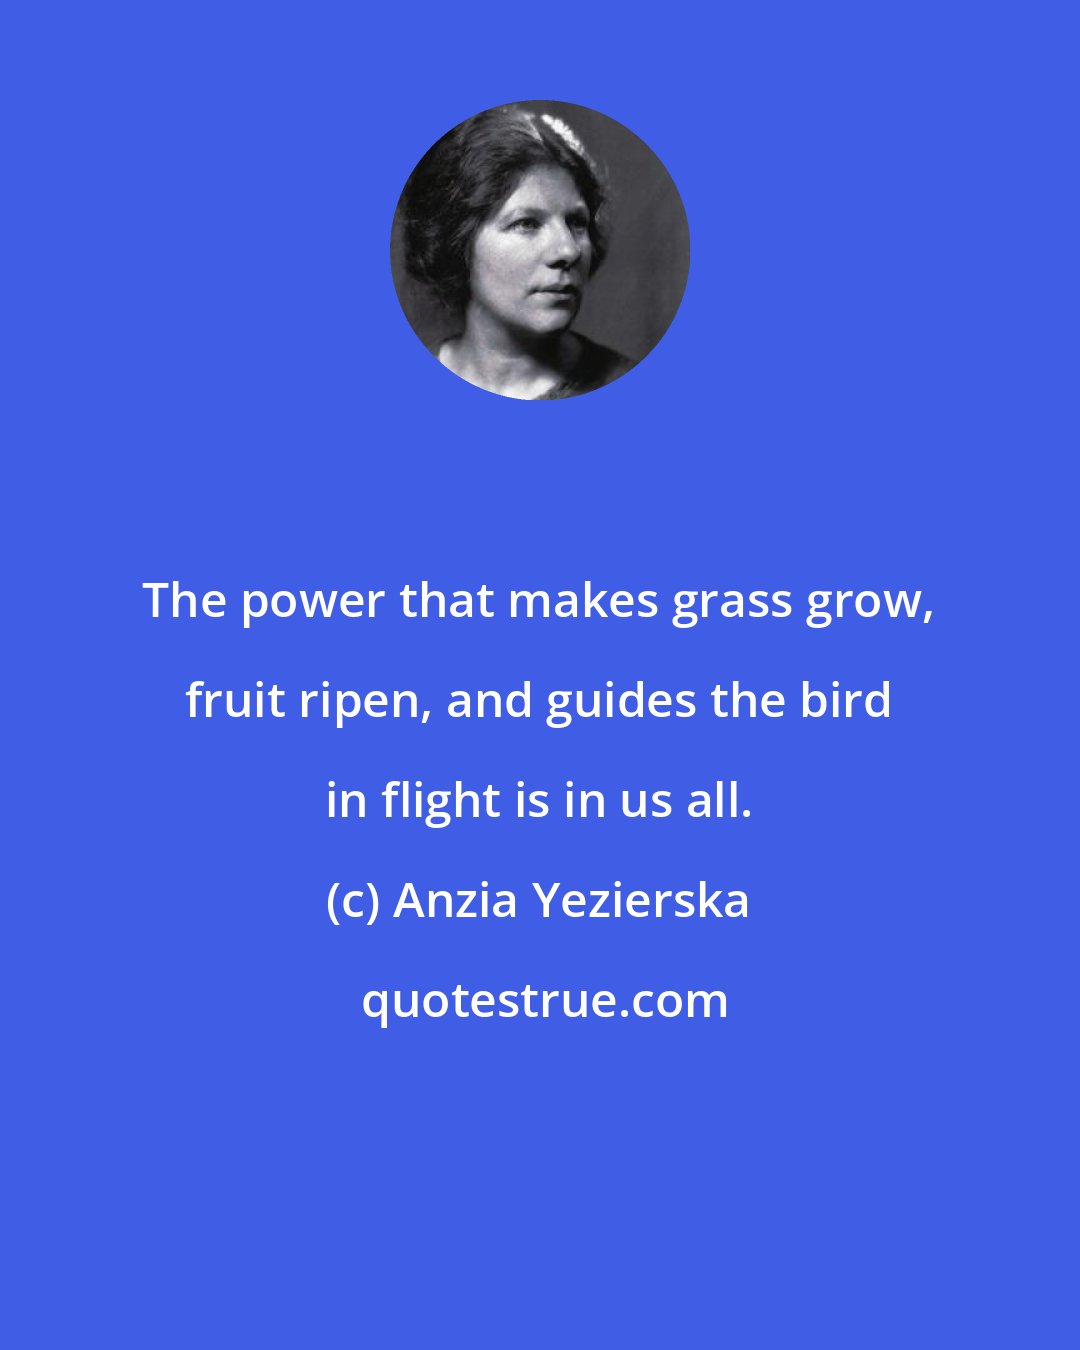 Anzia Yezierska: The power that makes grass grow, fruit ripen, and guides the bird in flight is in us all.